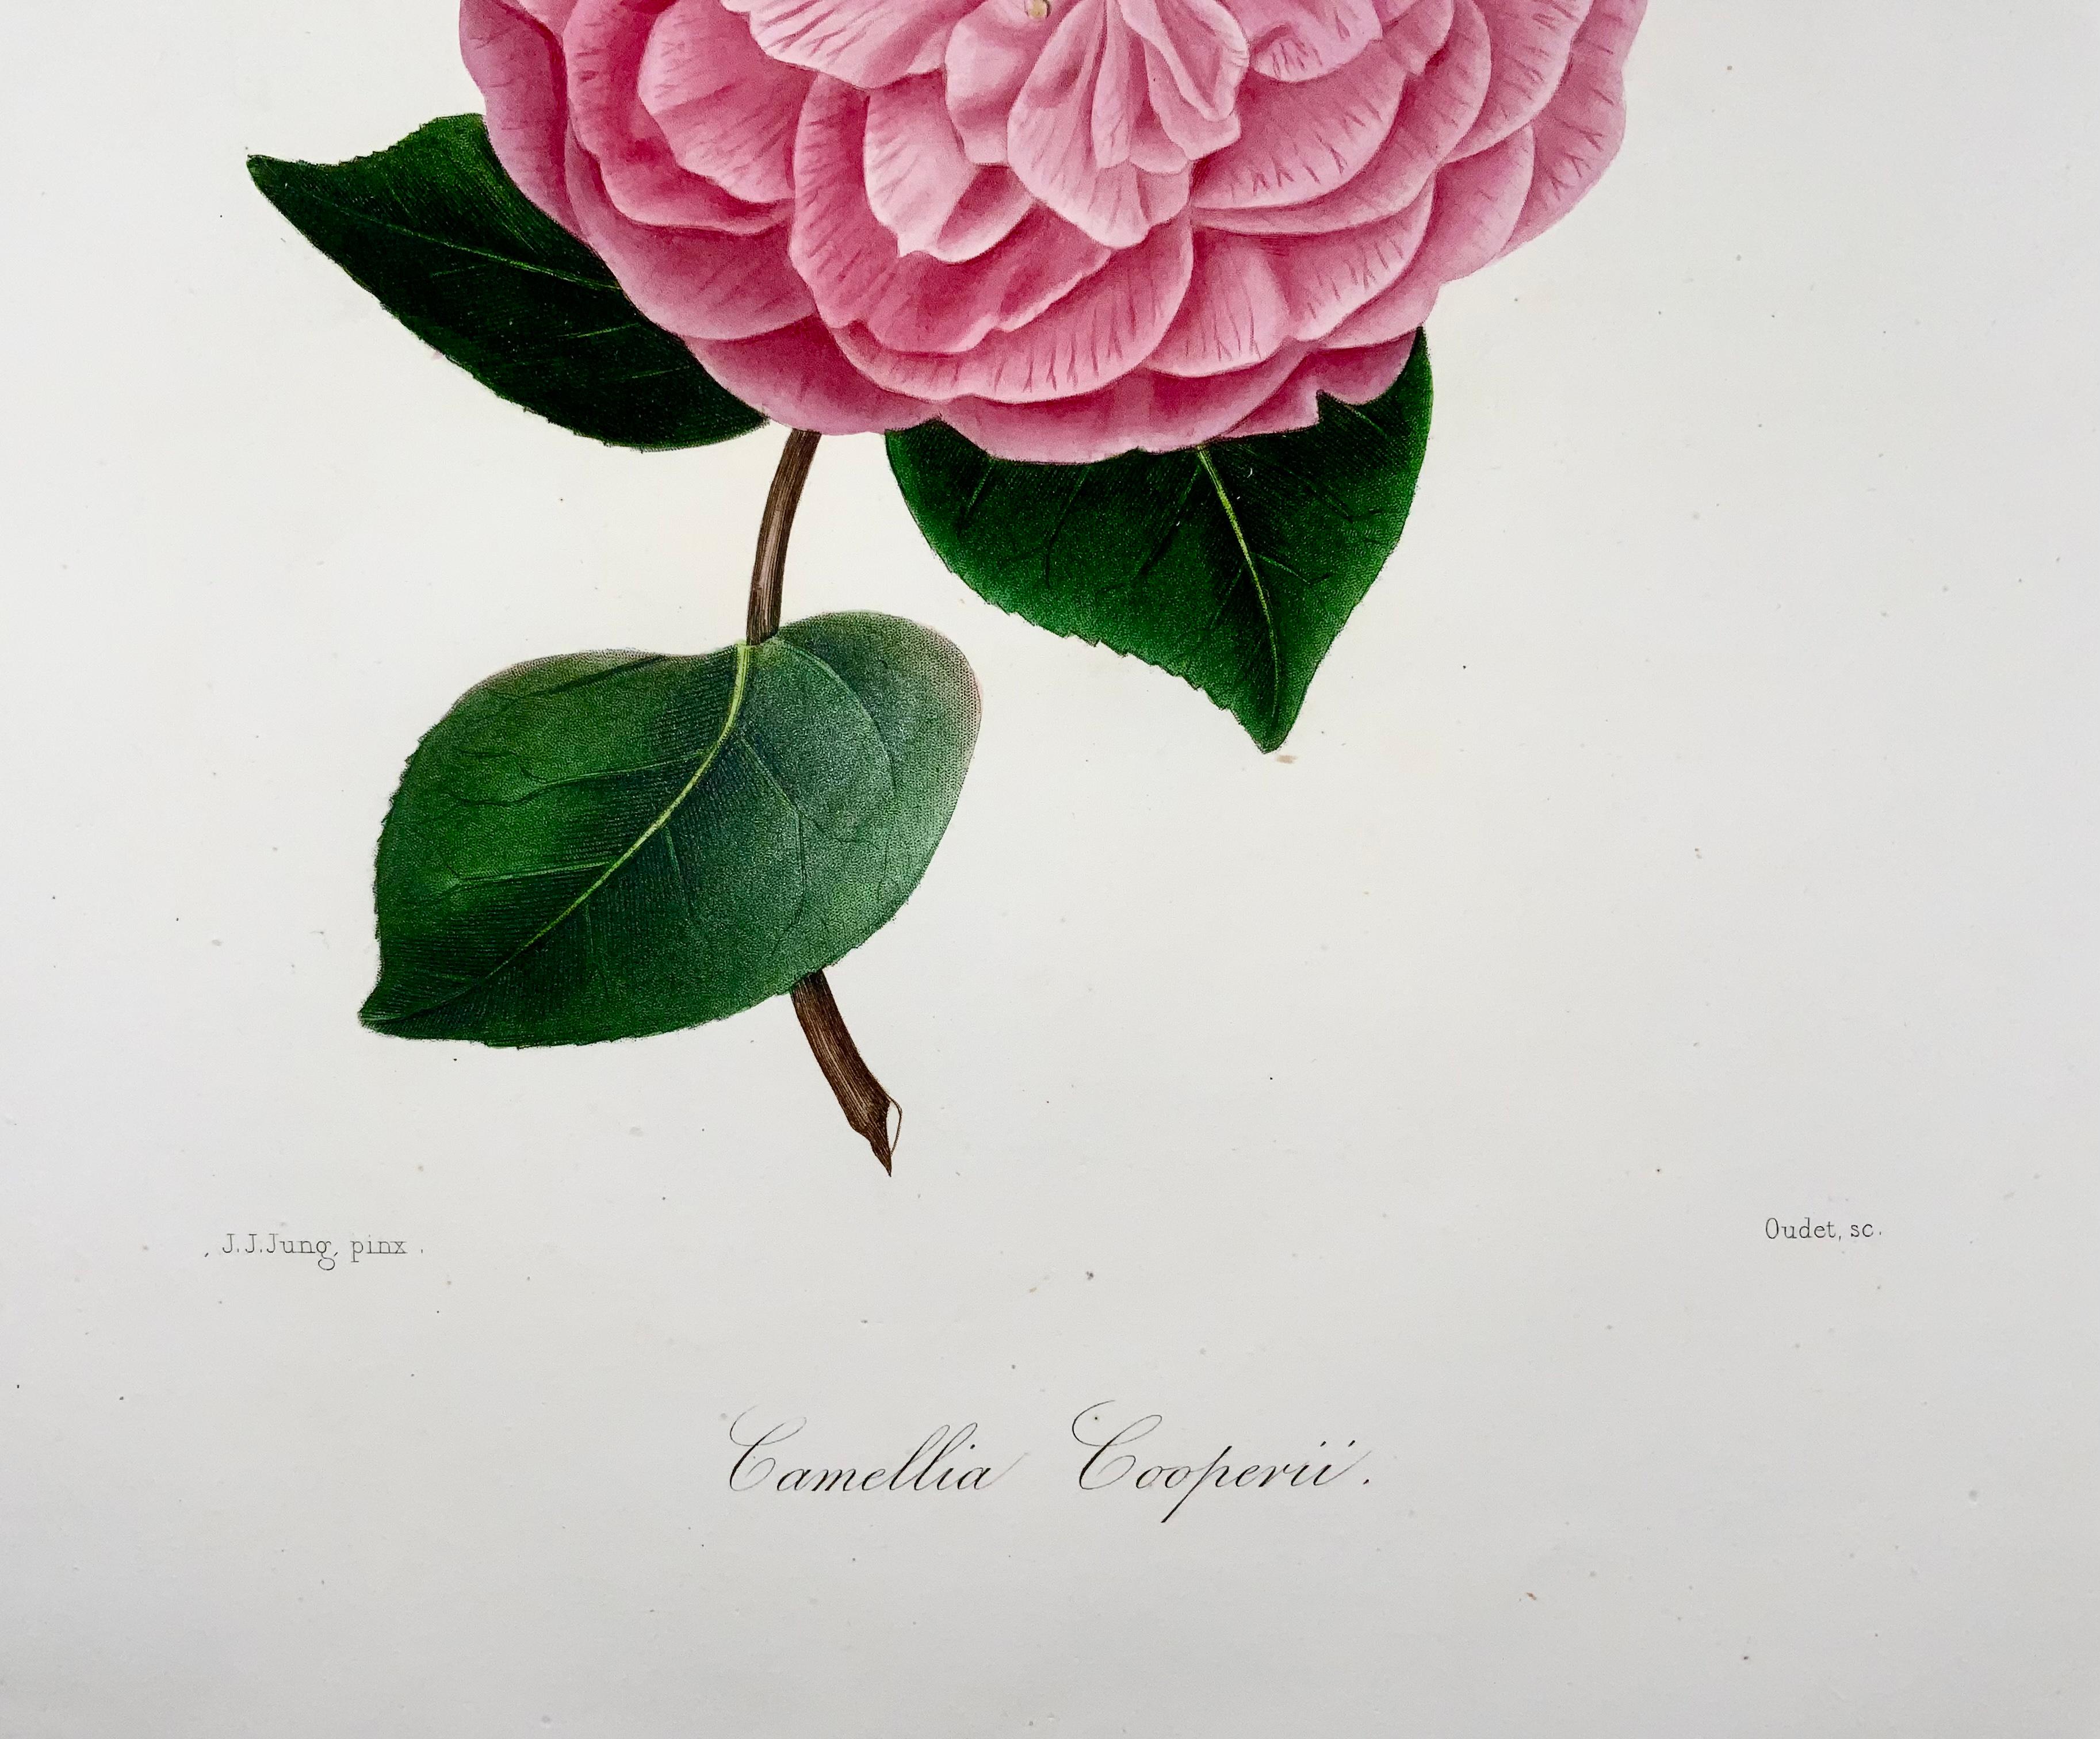 Hand-Painted Camelia Cooperii 'Camellia', Drawn by J J Jung, Engraved by Oudet, Berlèse For Sale